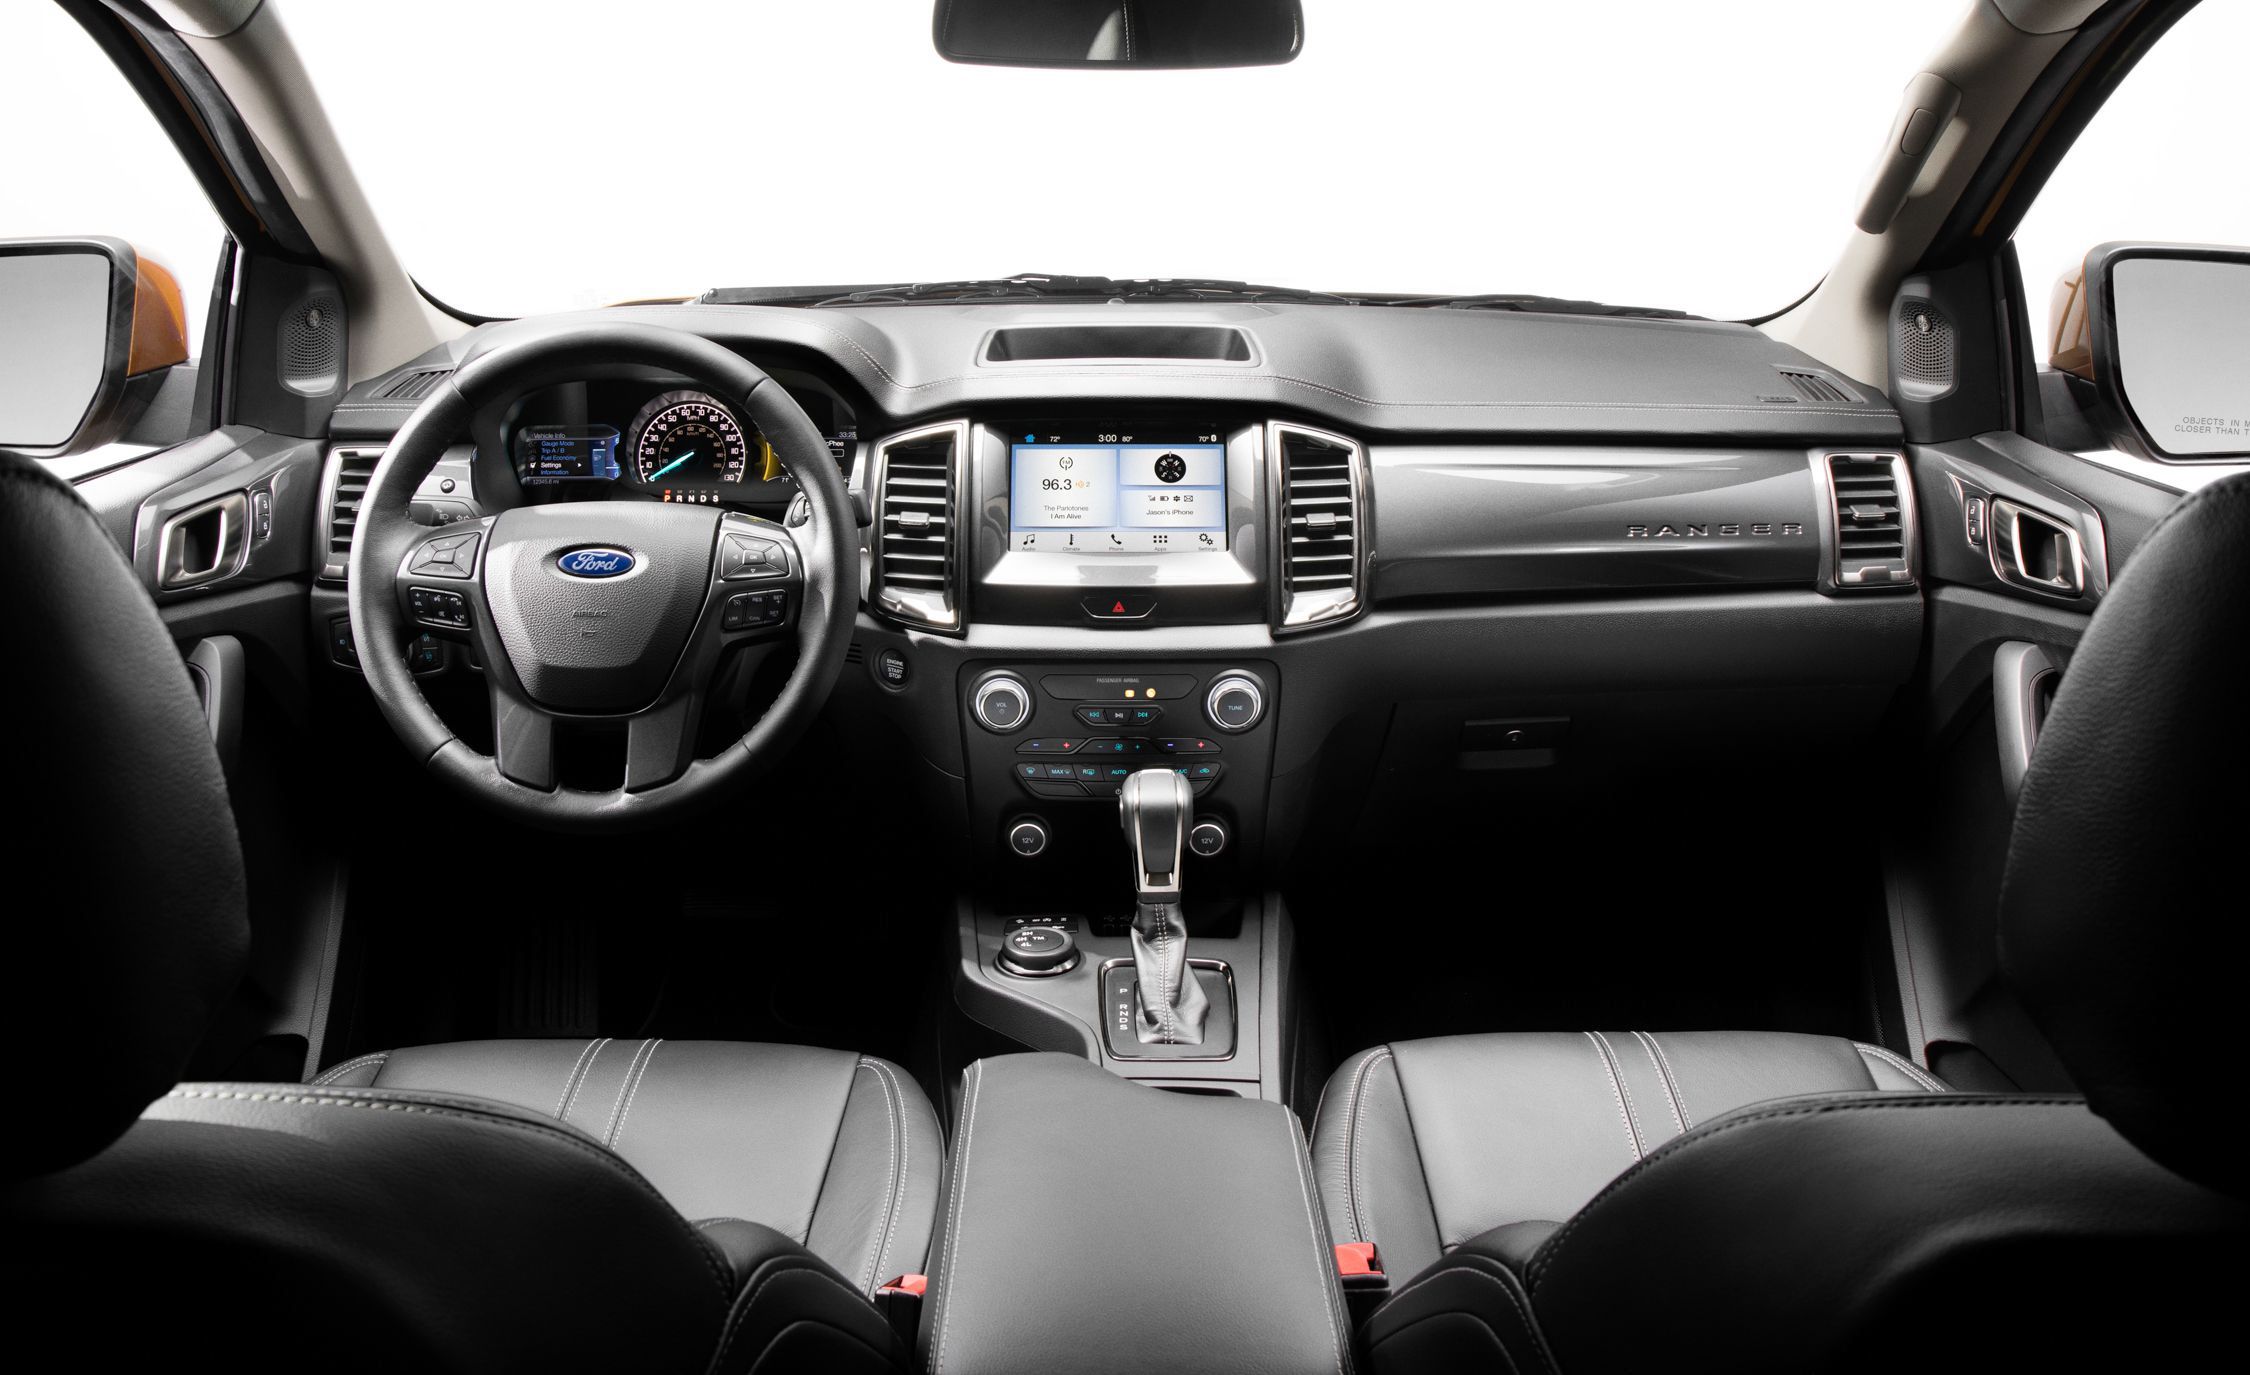 2019 Ford Ranger Interior Cockpit Wallpapers #26 of 27